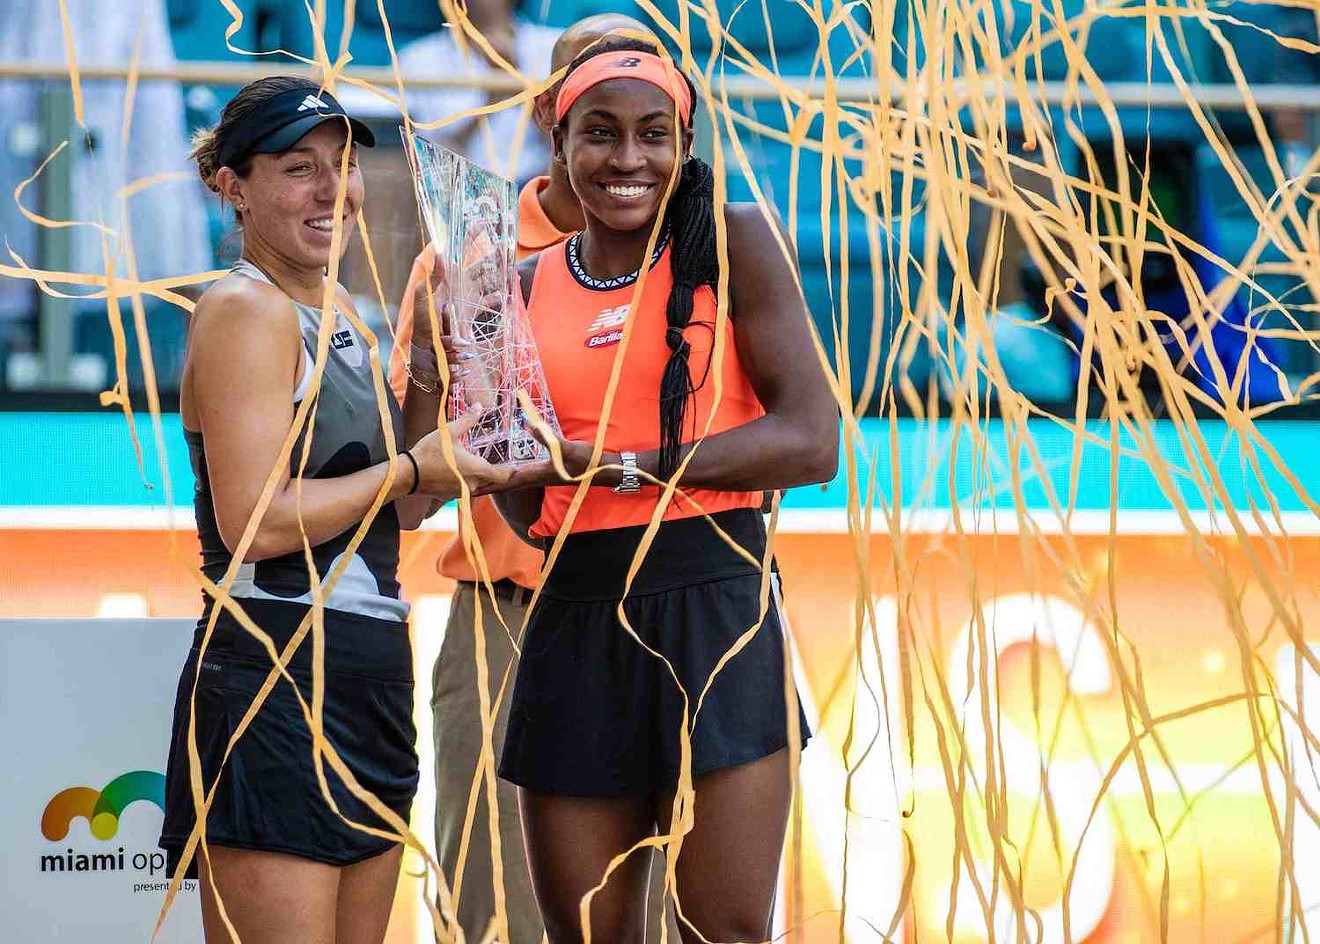 Delray Beach's own Coco Gauff (left) with fellow Florida resident Jessica Pegula, won the women's doubles championship at the 2023 Miami Open.